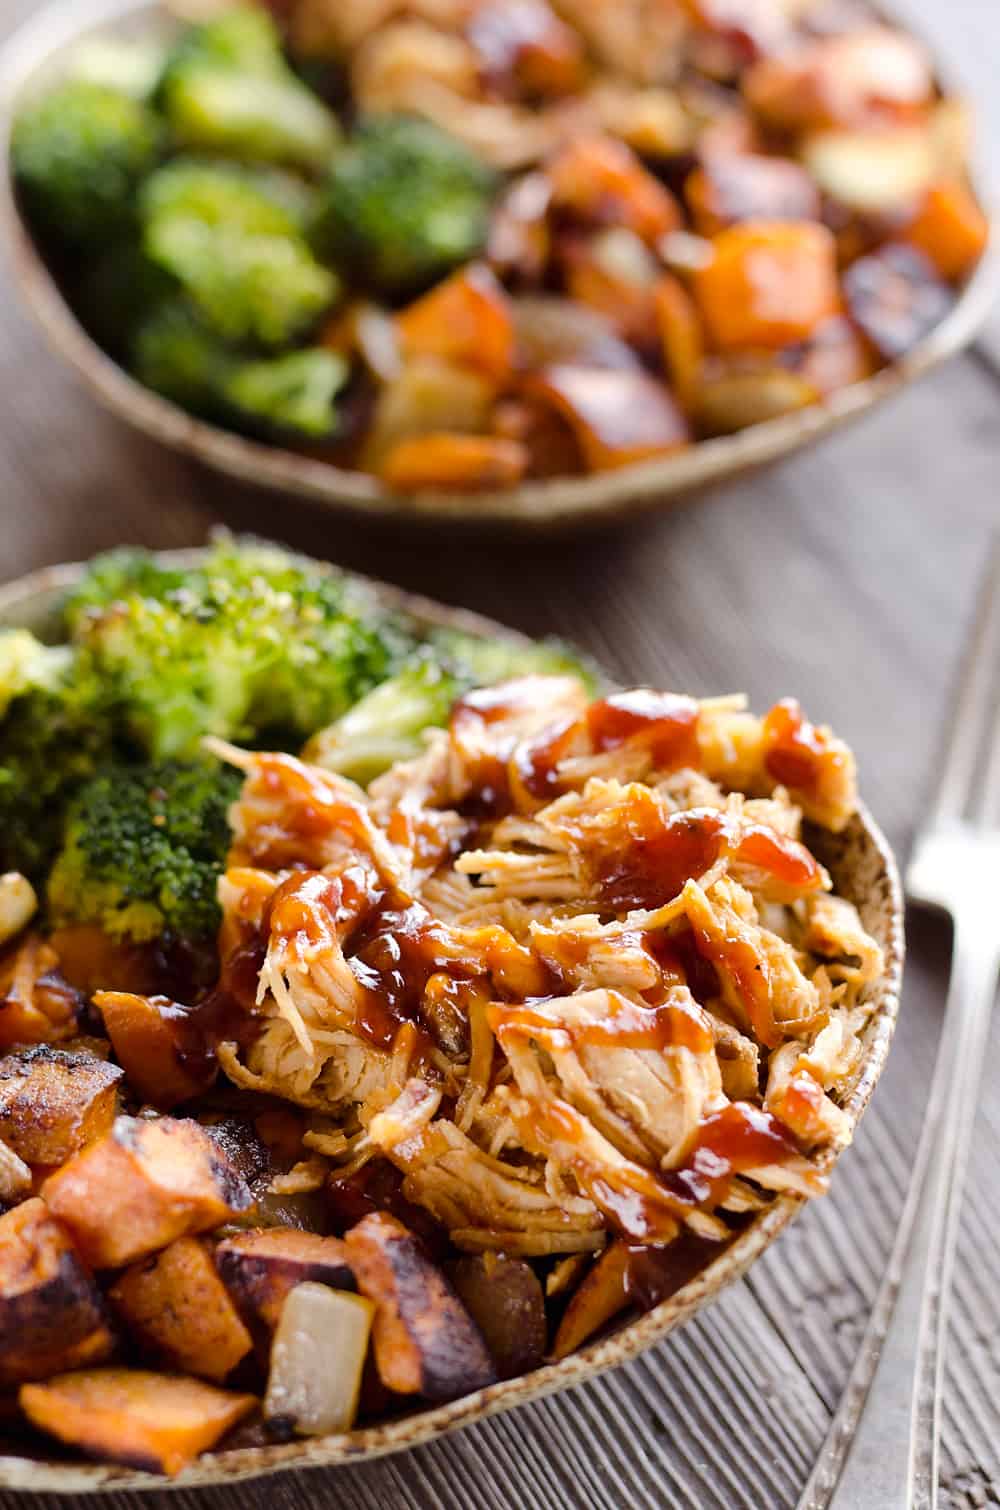 BBQ chicken and roasted sweet potato bowls